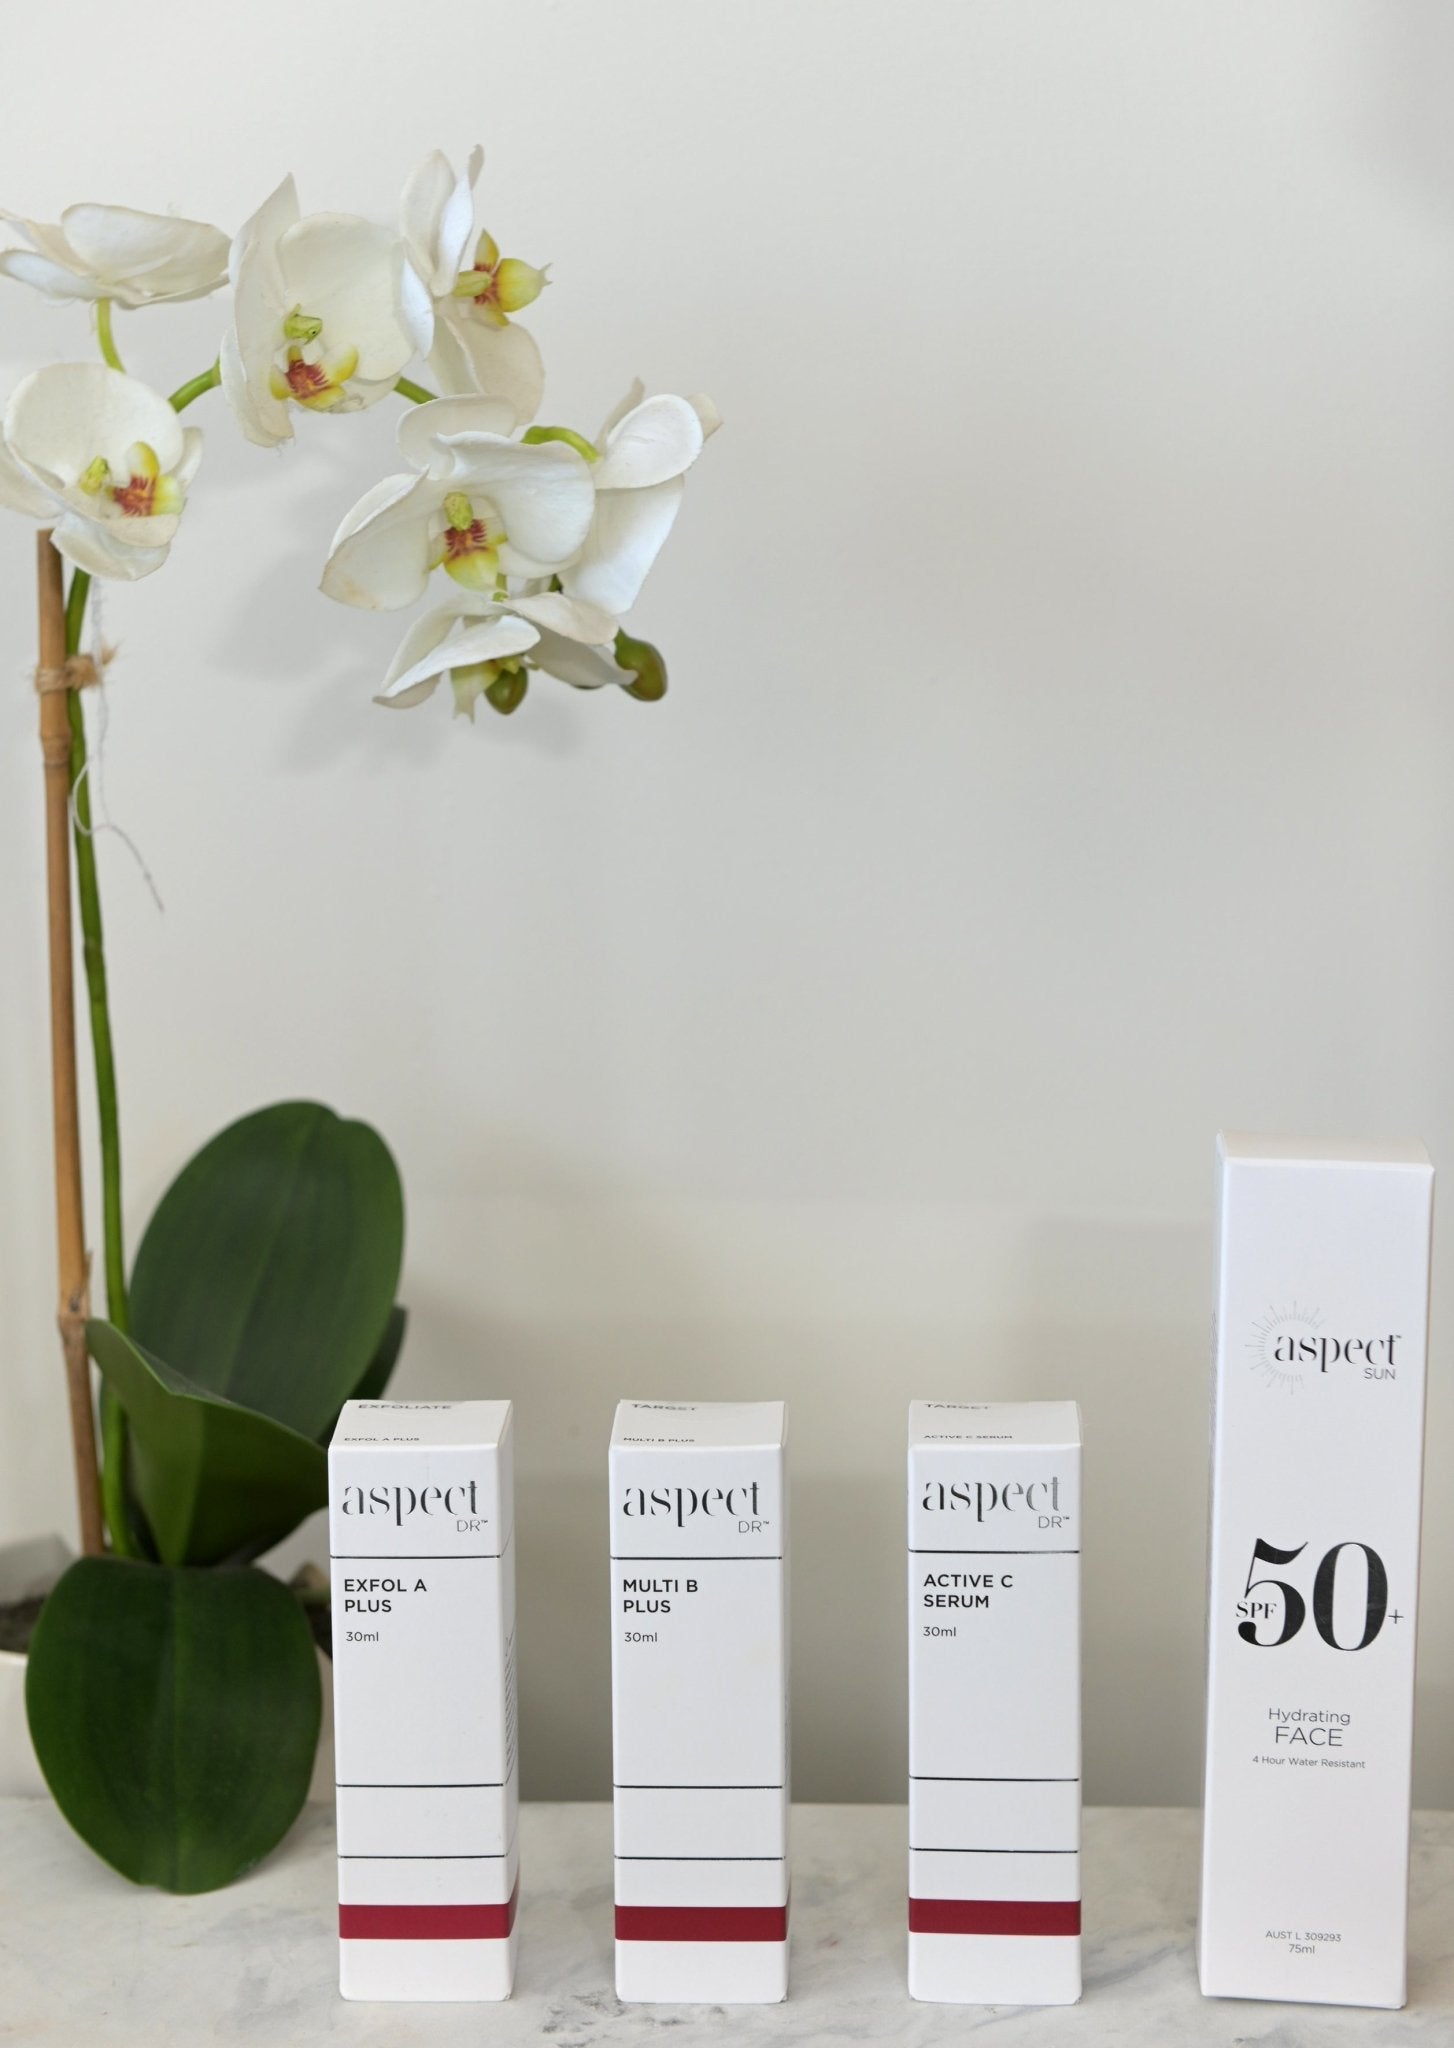 Aspect Dr A + B + C = FREE SPF (Hydrating Face SPF50) - Exquisite Laser Clinic